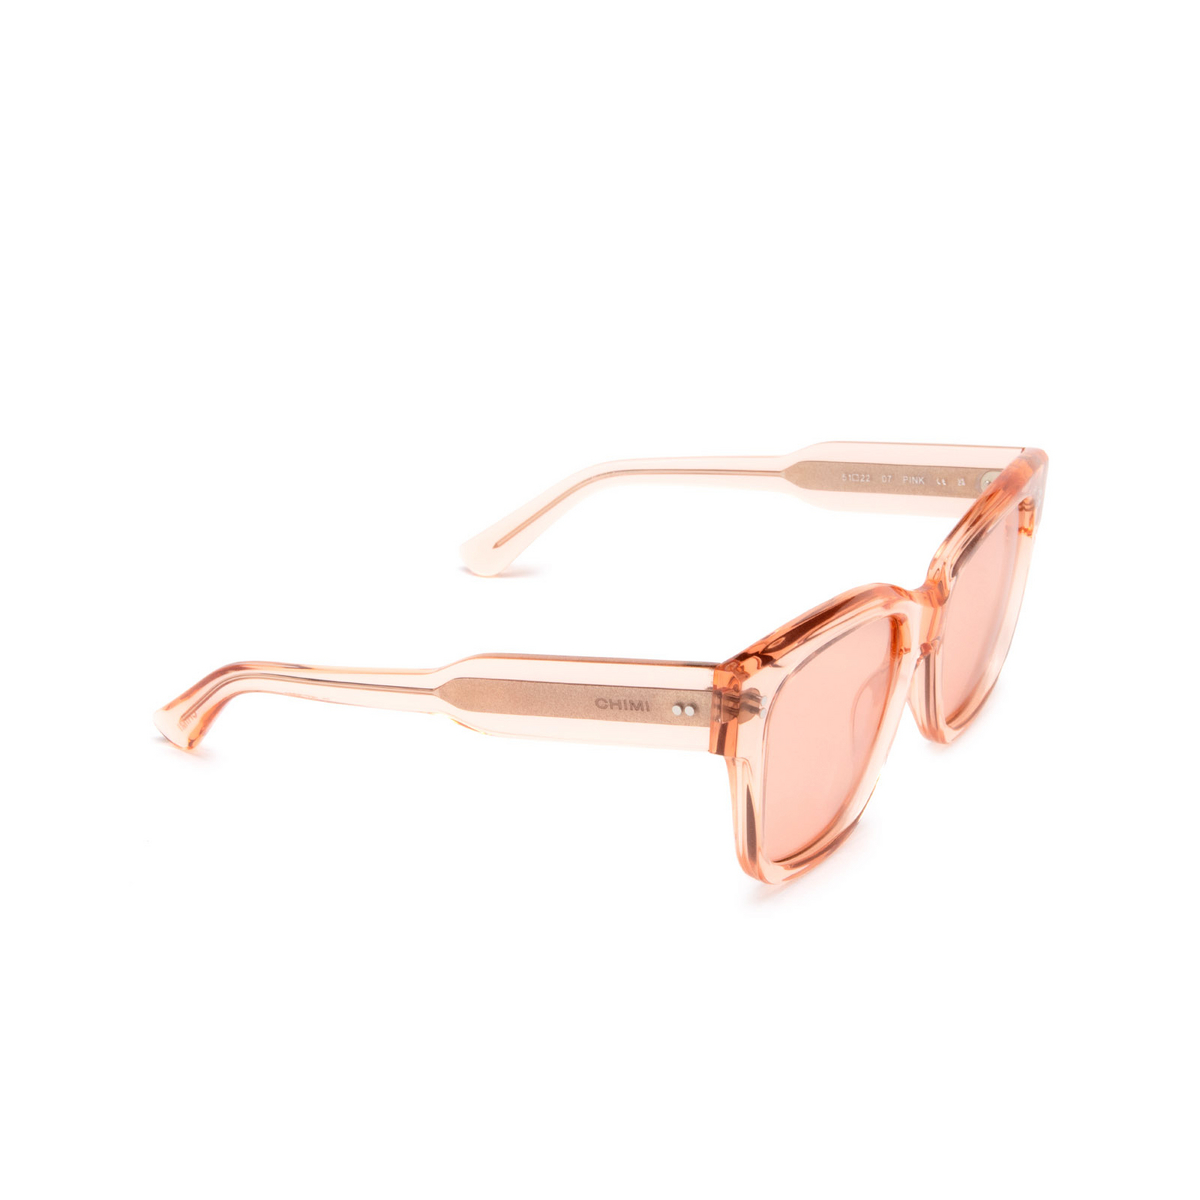 Chimi® Butterfly Sunglasses: 07 color Pink - three-quarters view